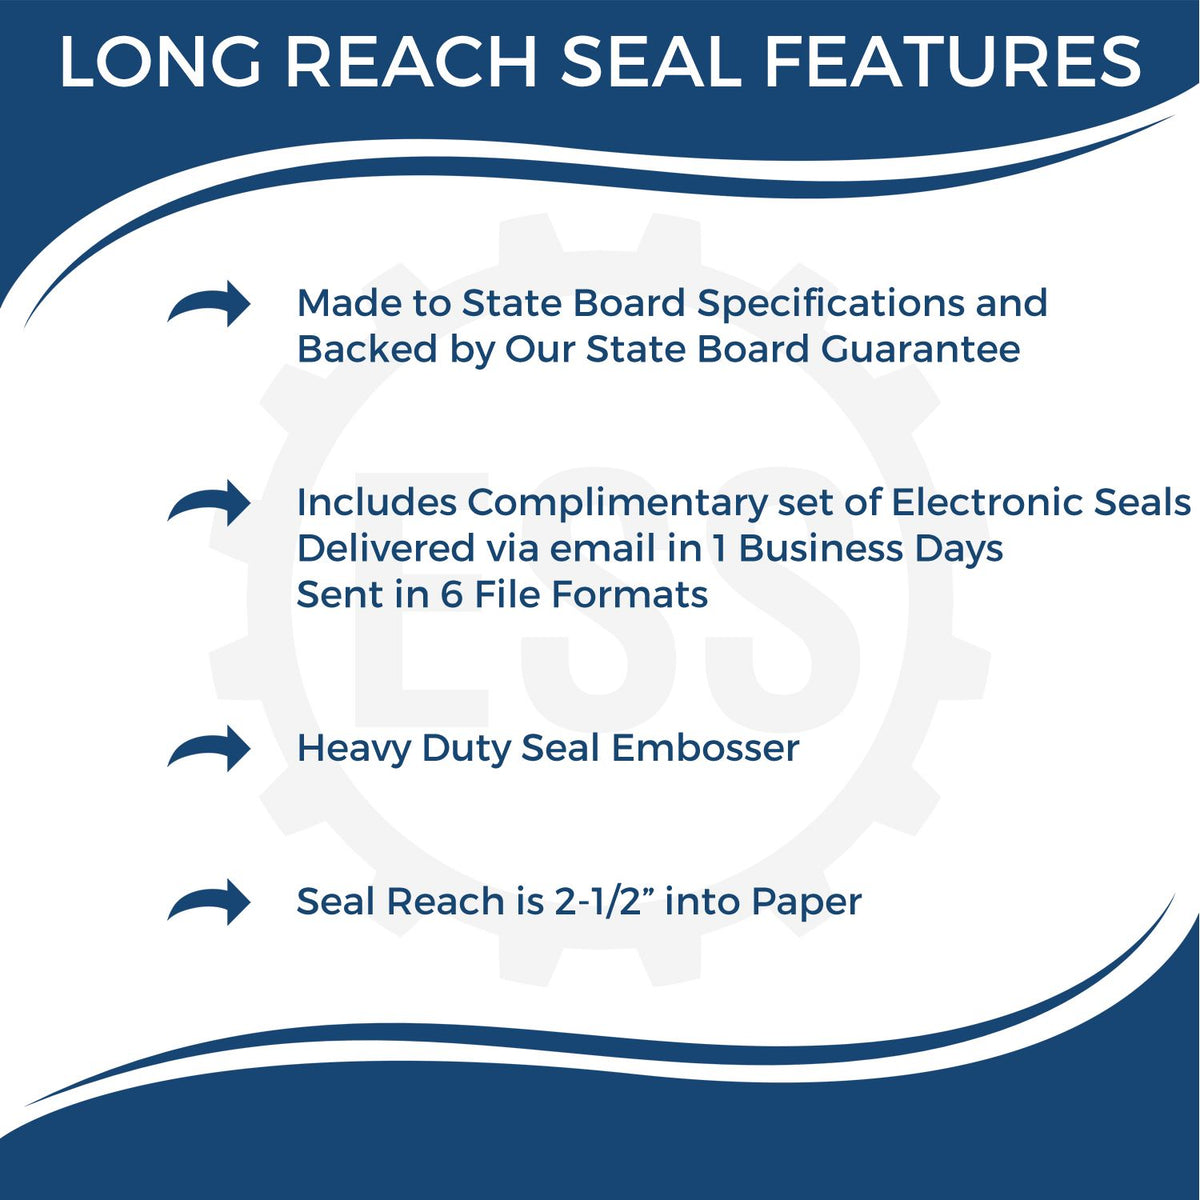 A picture of an infographic highlighting the selling points for the Long Reach Massachusetts PE Seal